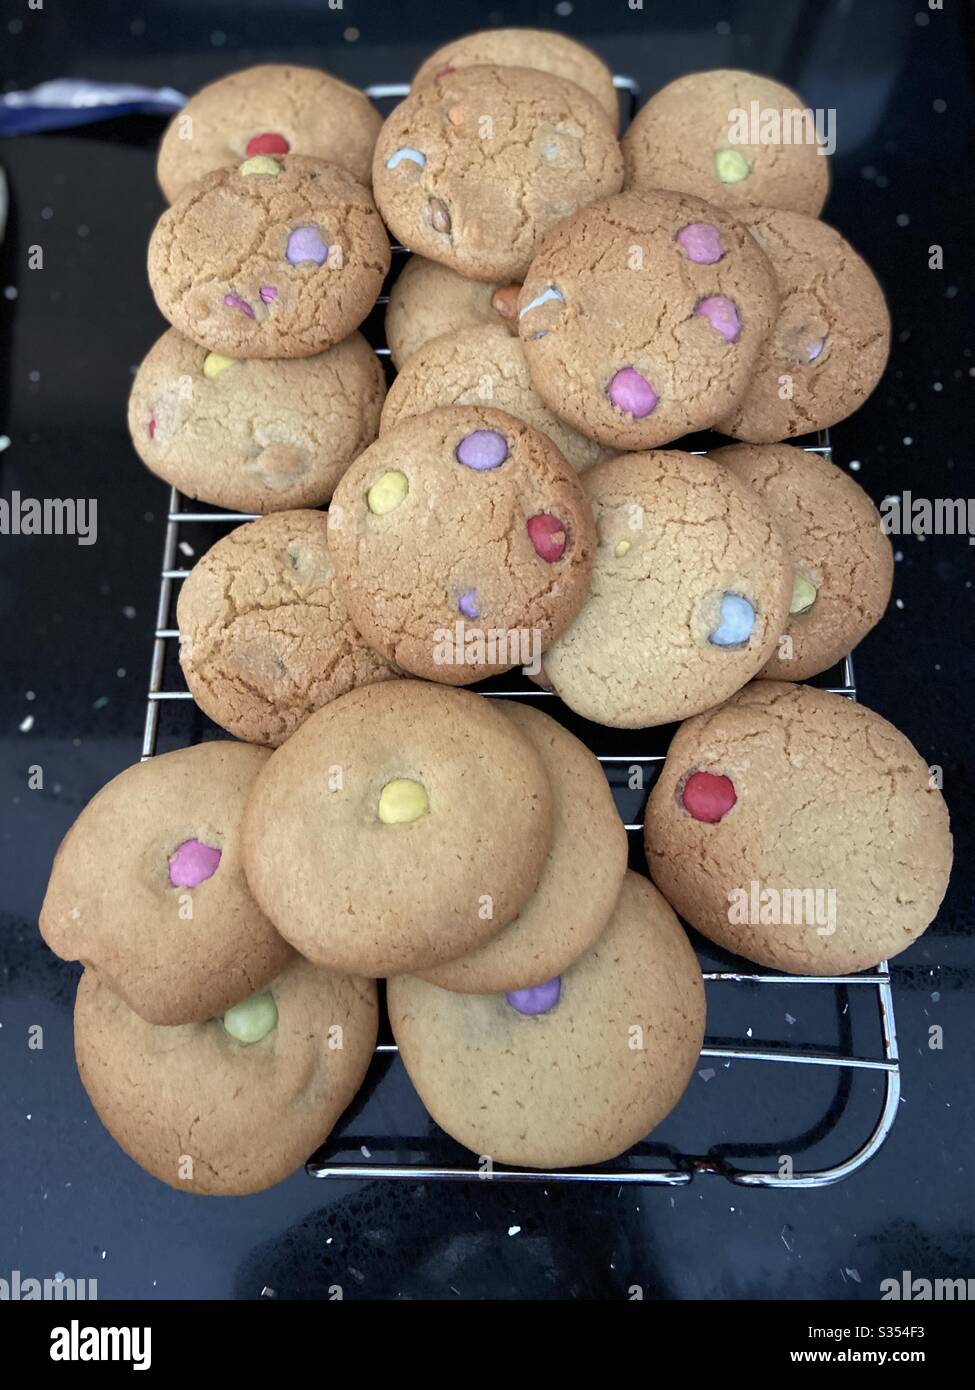 With COVID19 causing havoc, we indulged in home baking and baked these beautiful smarties themed cookies. Stock Photo